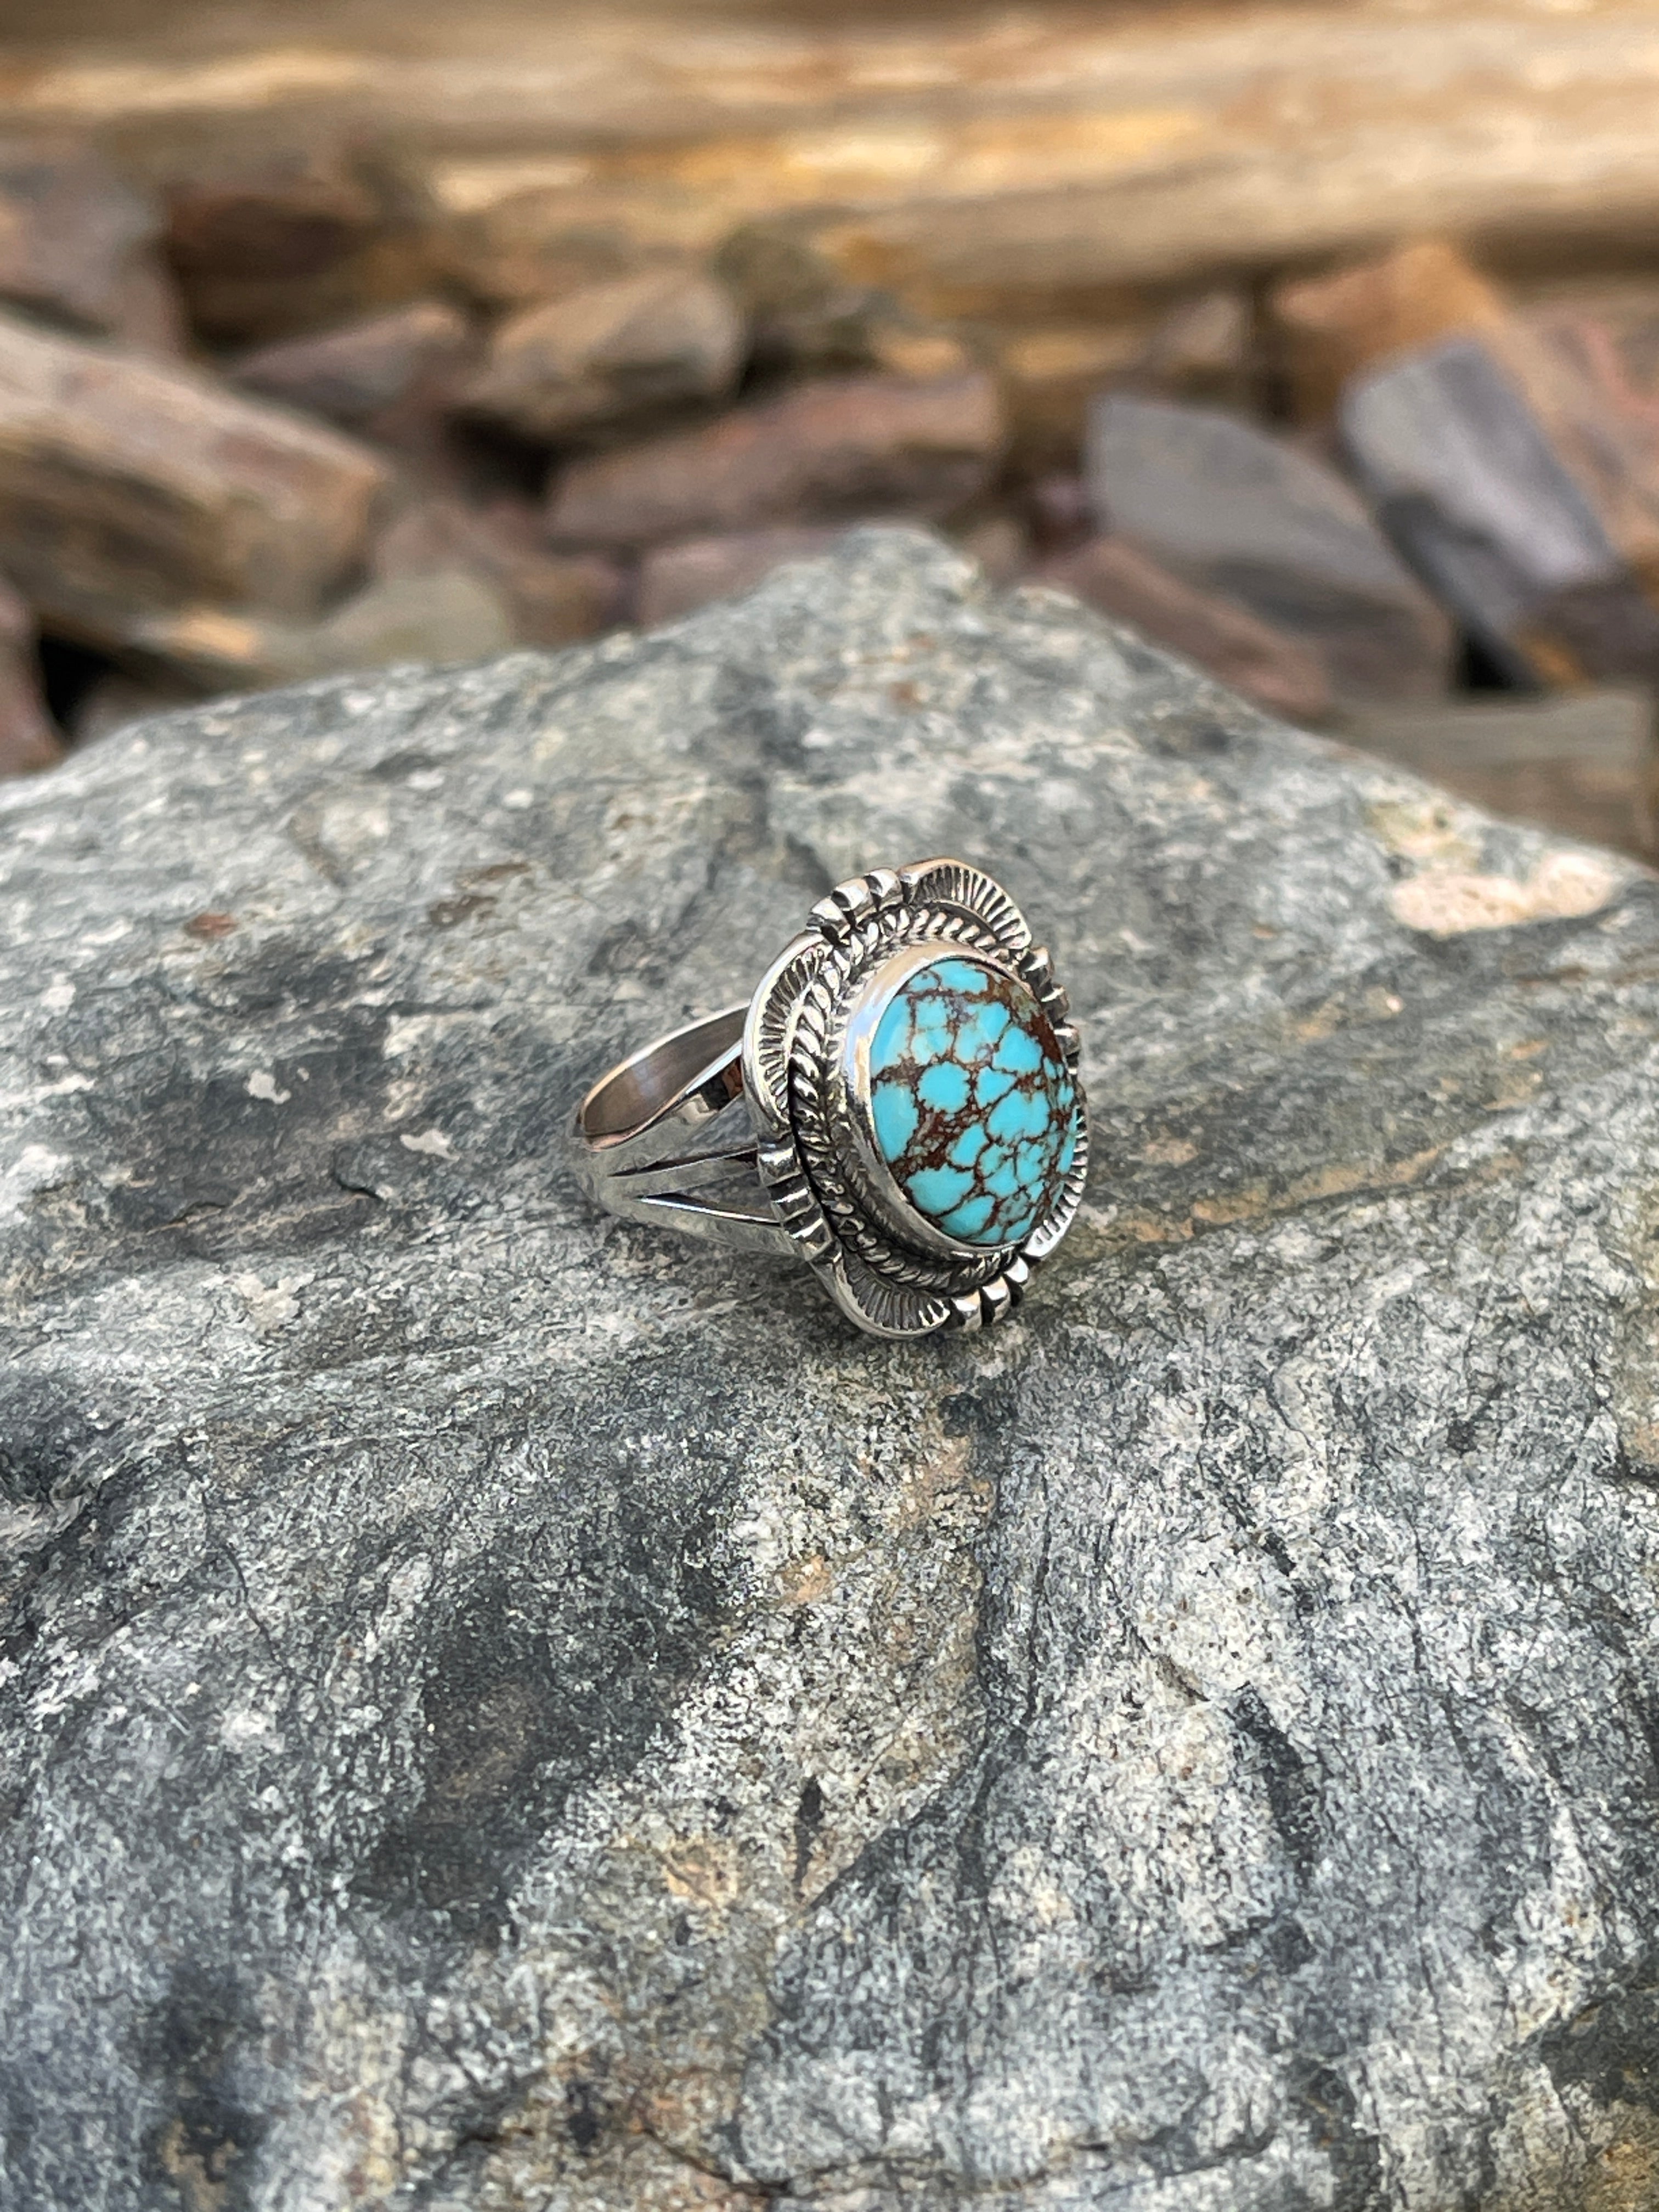 Handmade Solid Sterling Silver Kingman Turquoise Ring with Traditional Hand Stamping - Size 6